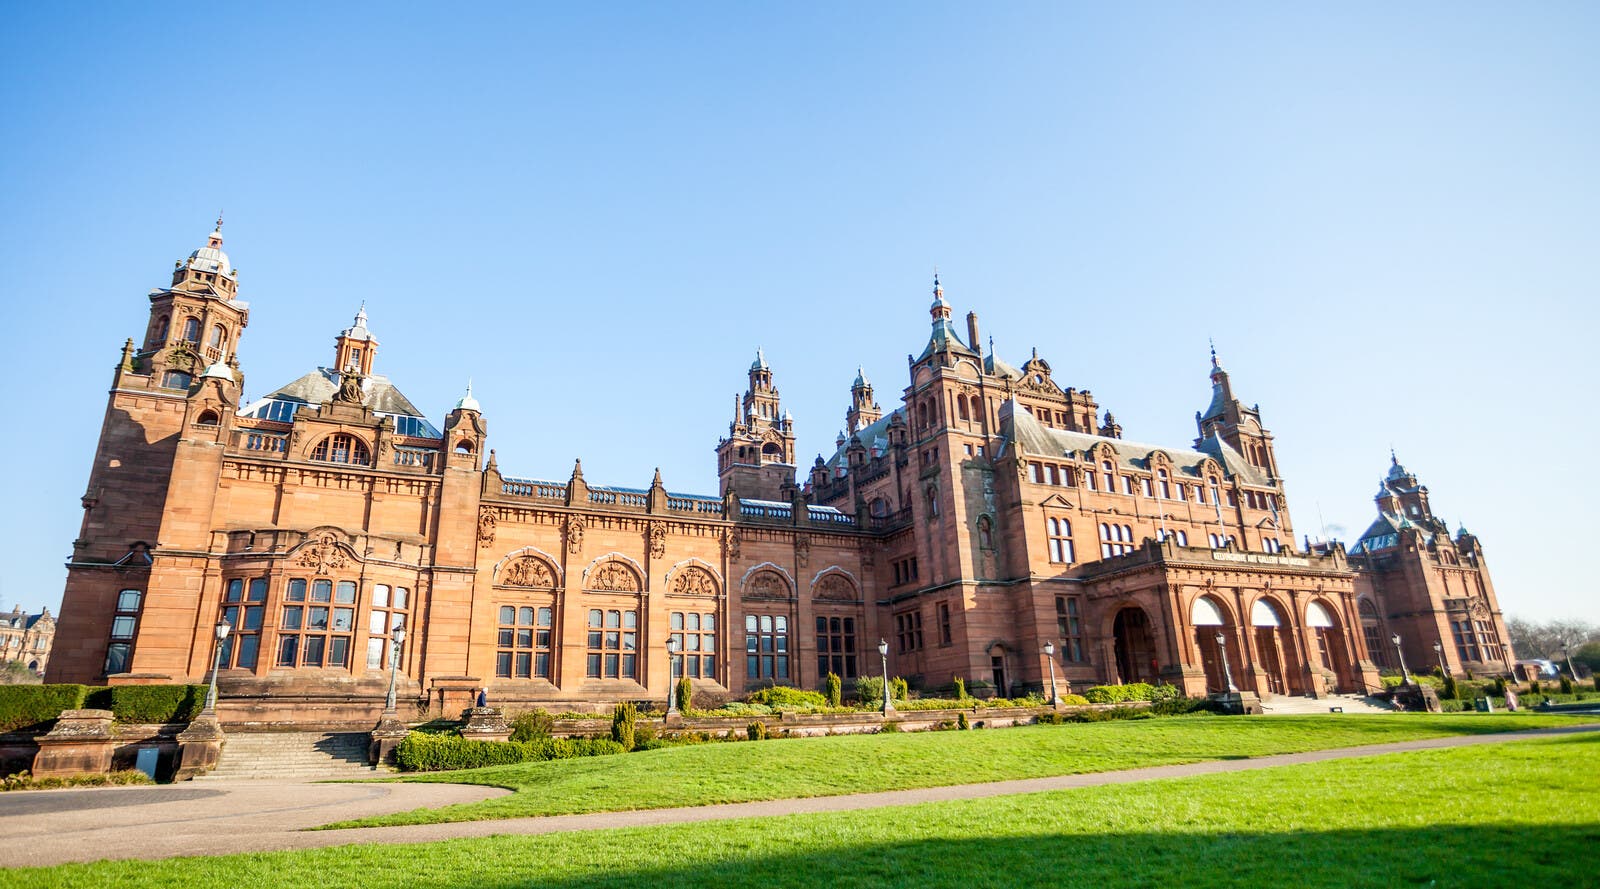 The Kelvingrove Art Gallery and Museum in Glasgow.